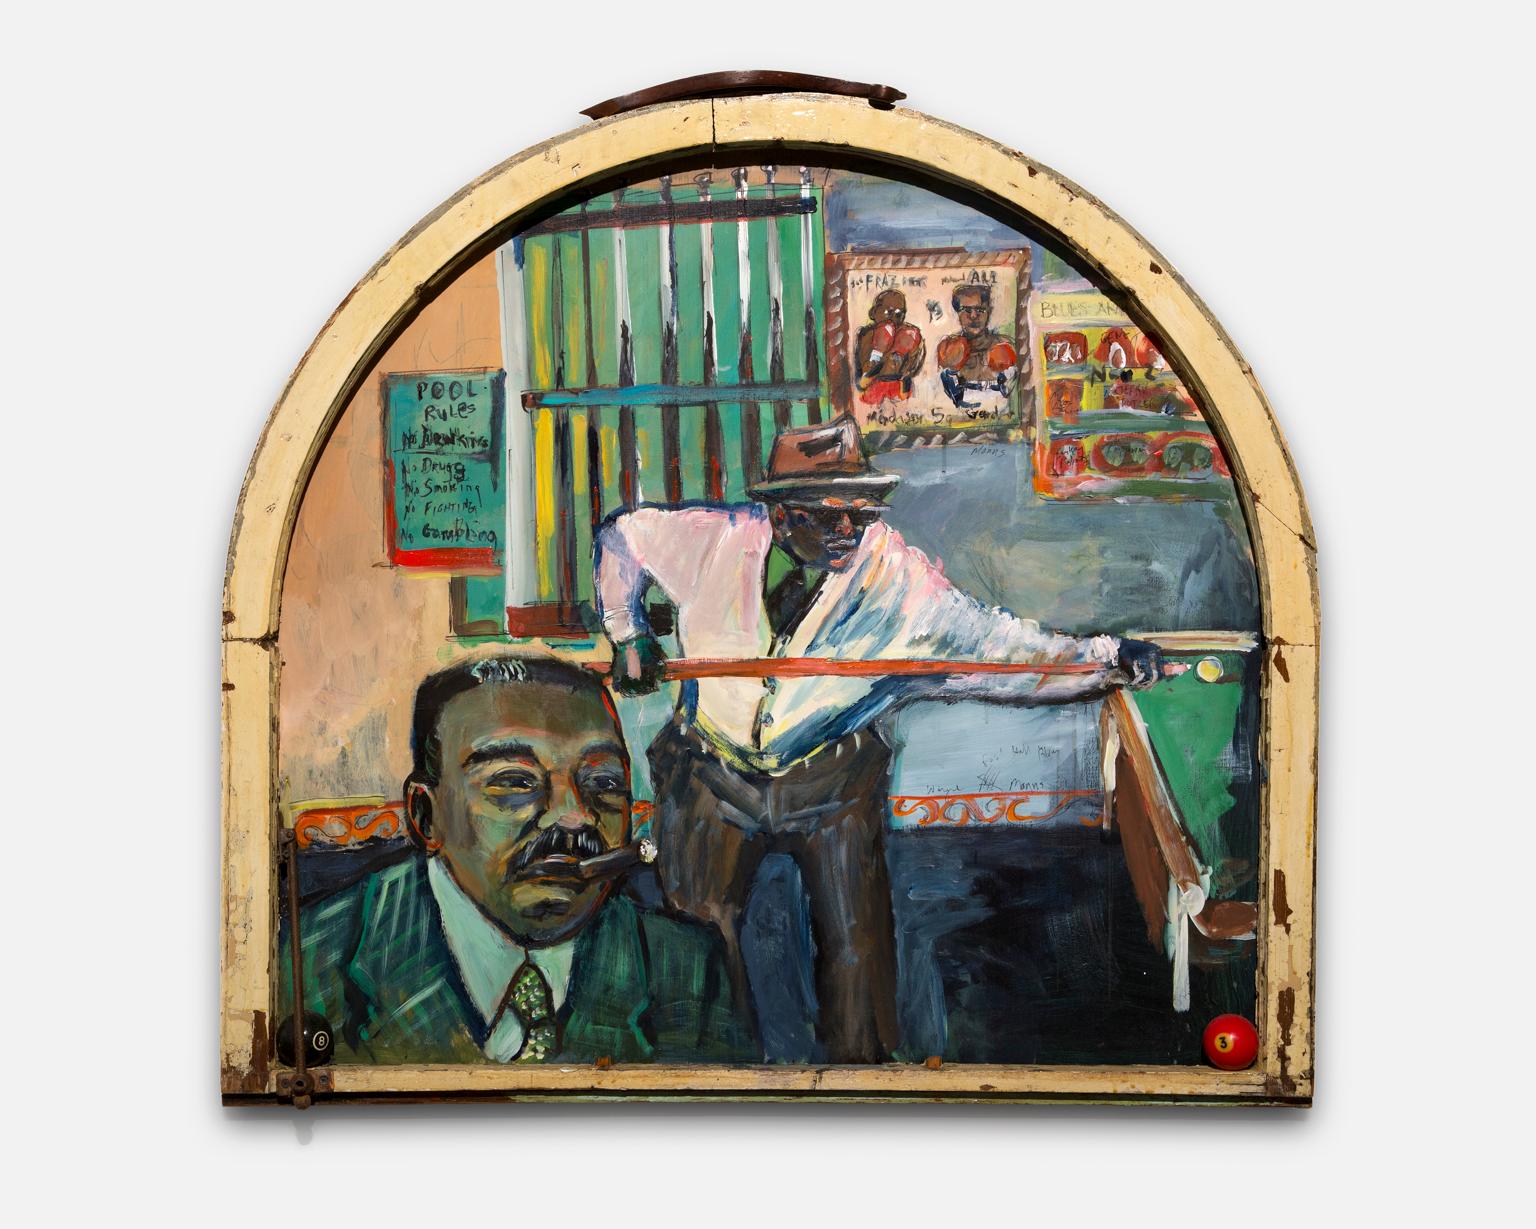 Wayne Manns Figurative Painting - "Pool Hall", Acrylic & Found Objects, African-American Outsider Artist